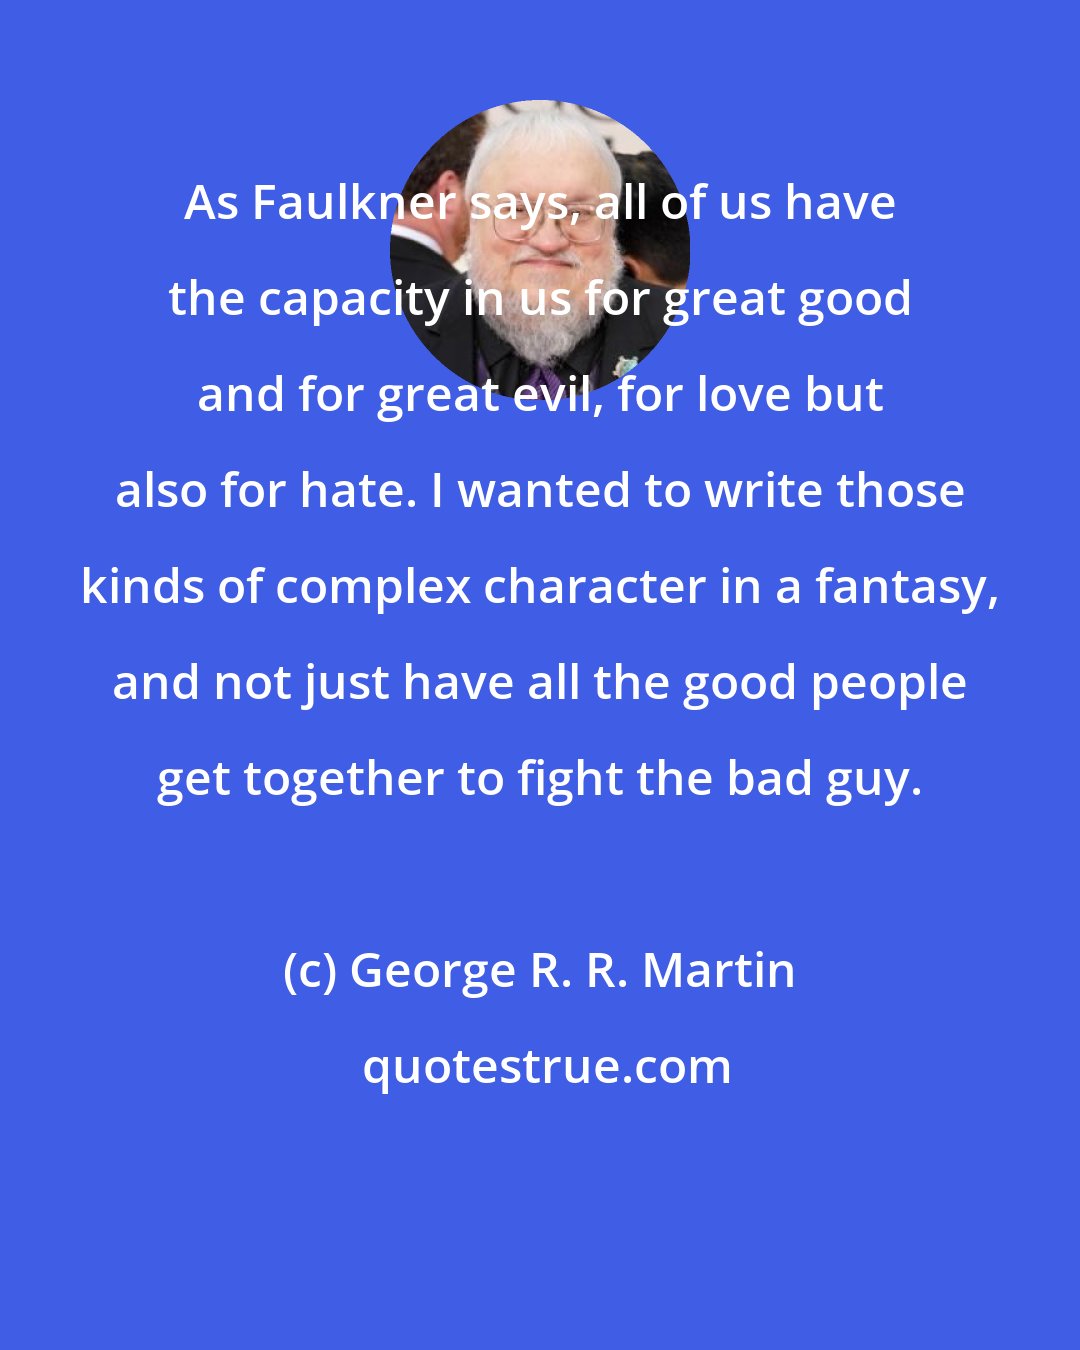 George R. R. Martin: As Faulkner says, all of us have the capacity in us for great good and for great evil, for love but also for hate. I wanted to write those kinds of complex character in a fantasy, and not just have all the good people get together to fight the bad guy.